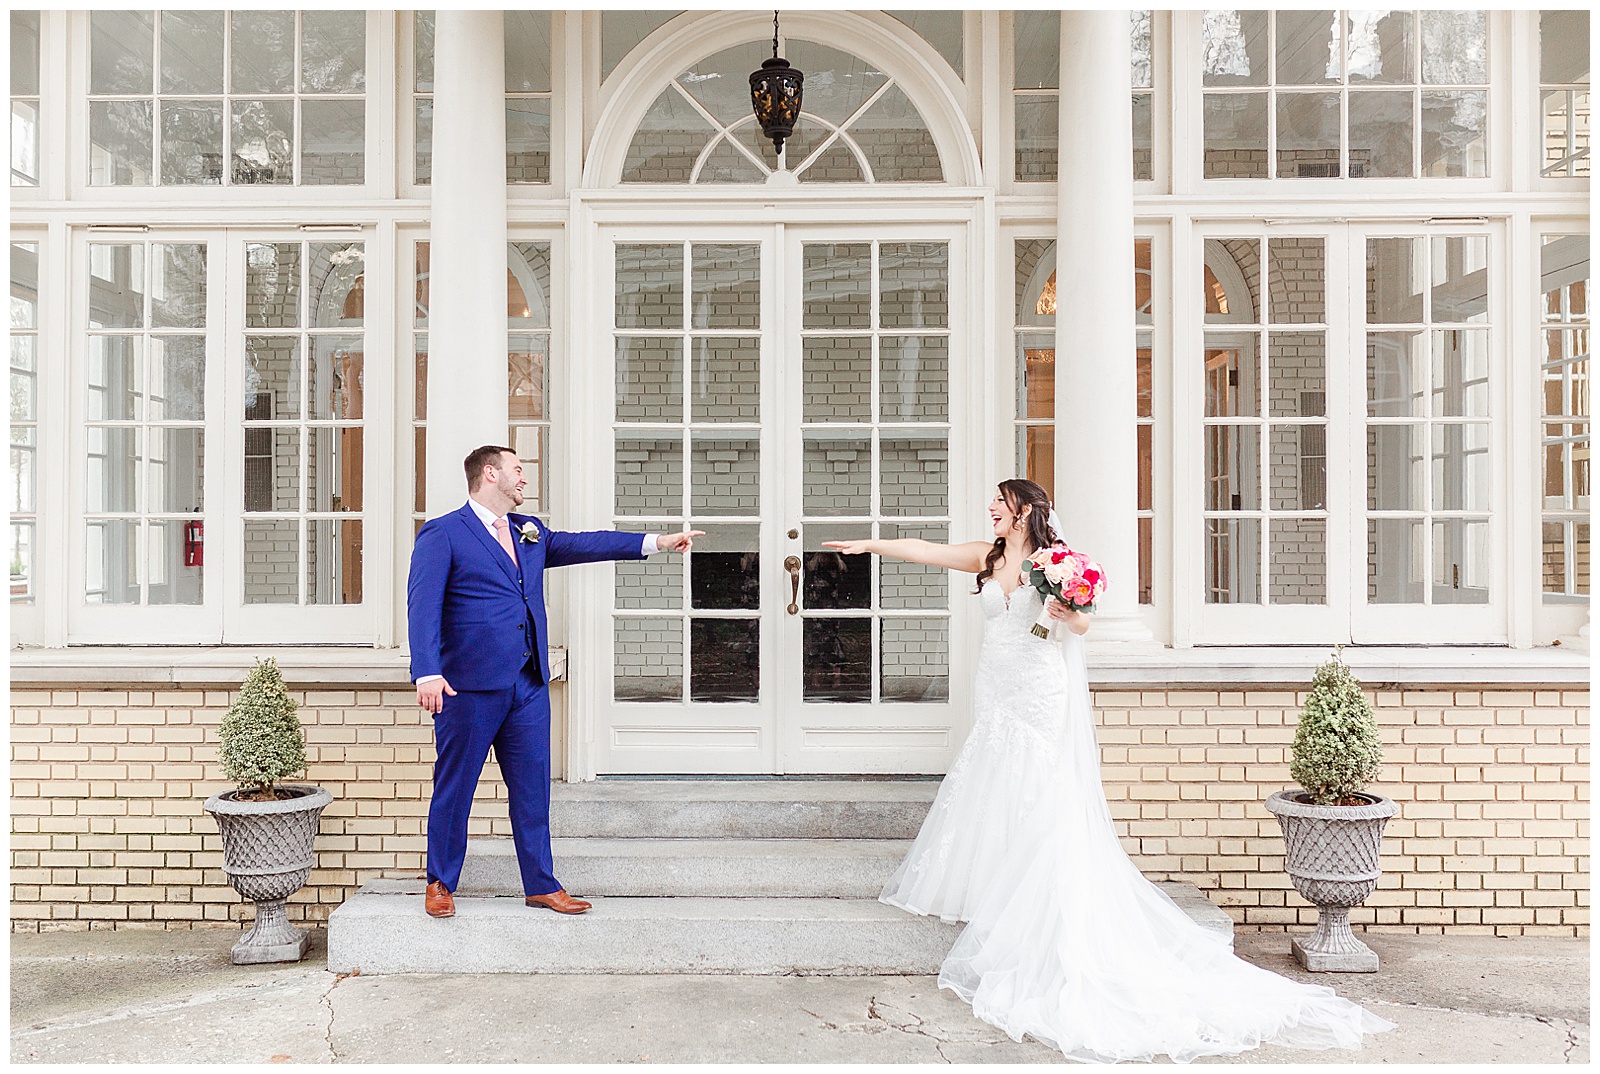 Adorable Light and Airy Bride Groom Outdoor Wedding Portraits at Separk Mansion in Gastonia, NC | Kevyn Dixon Photography